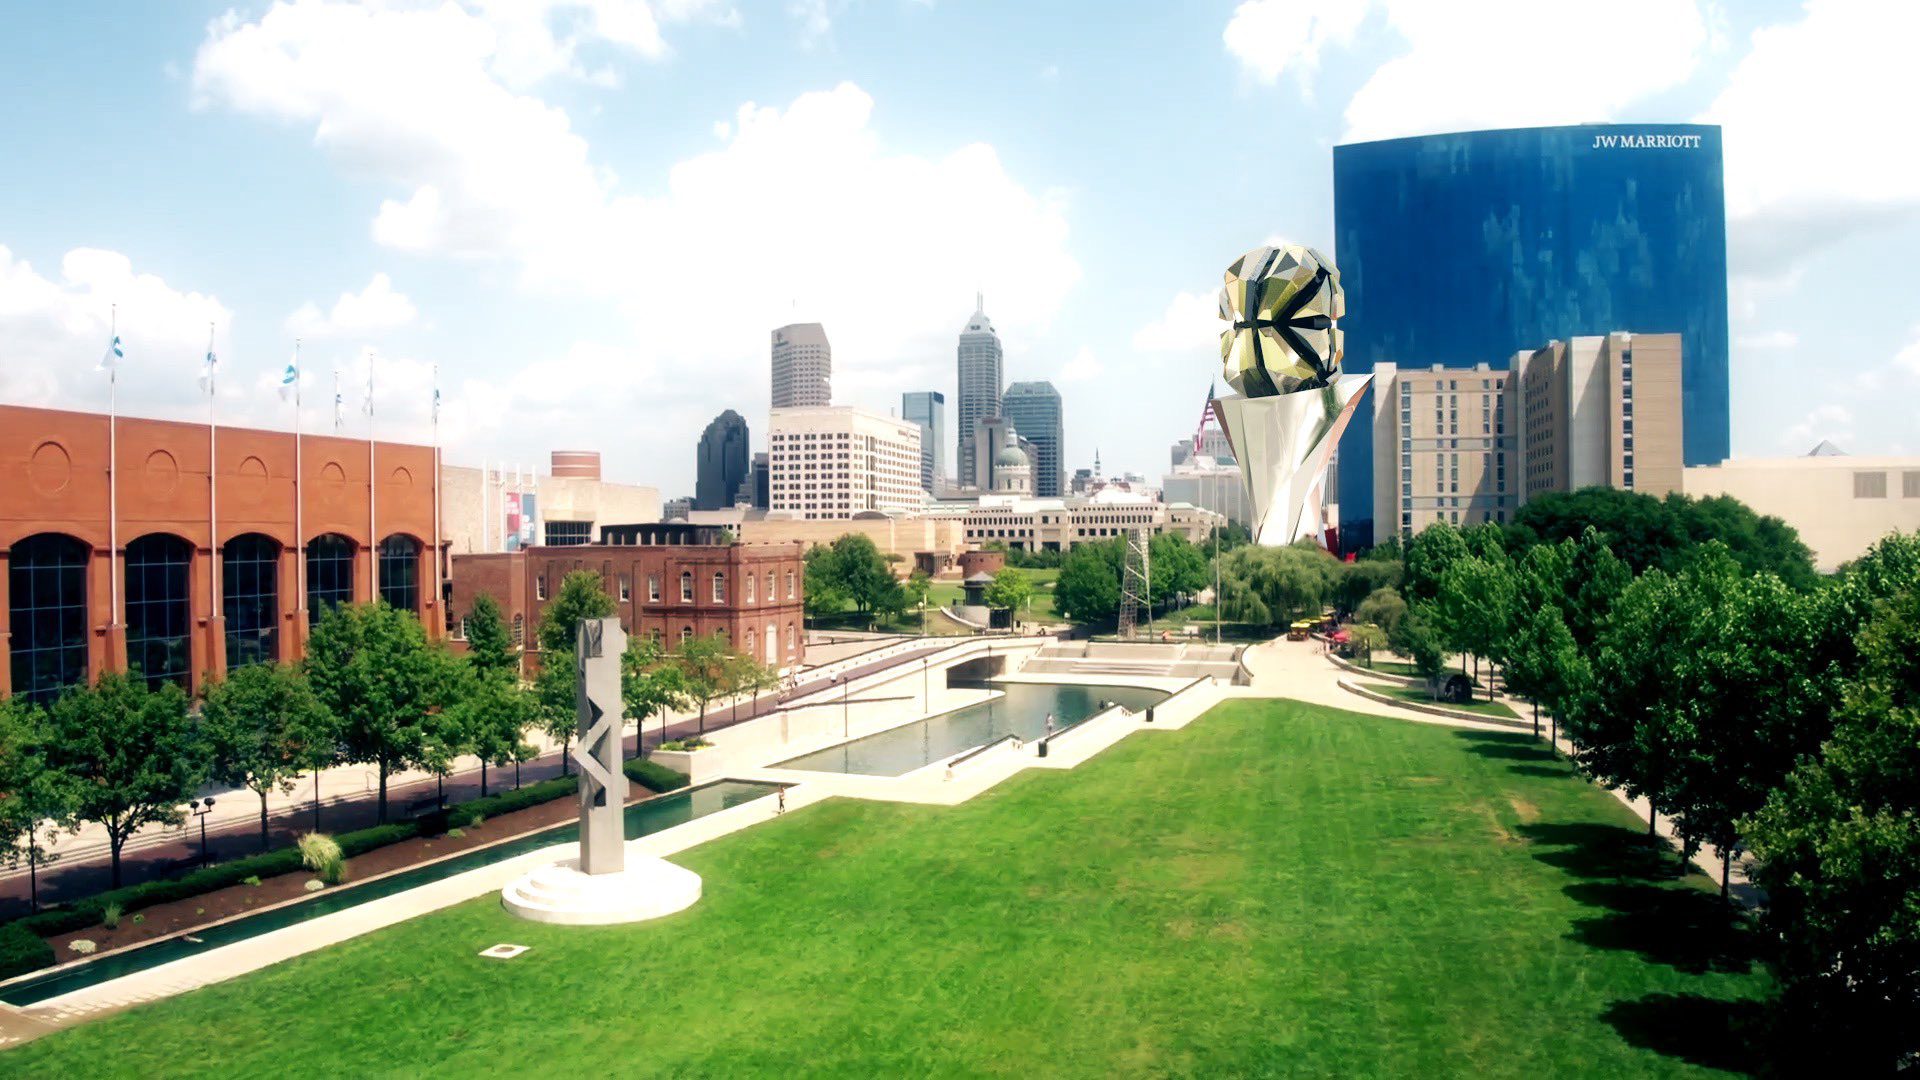 The host city will be Indianapolis